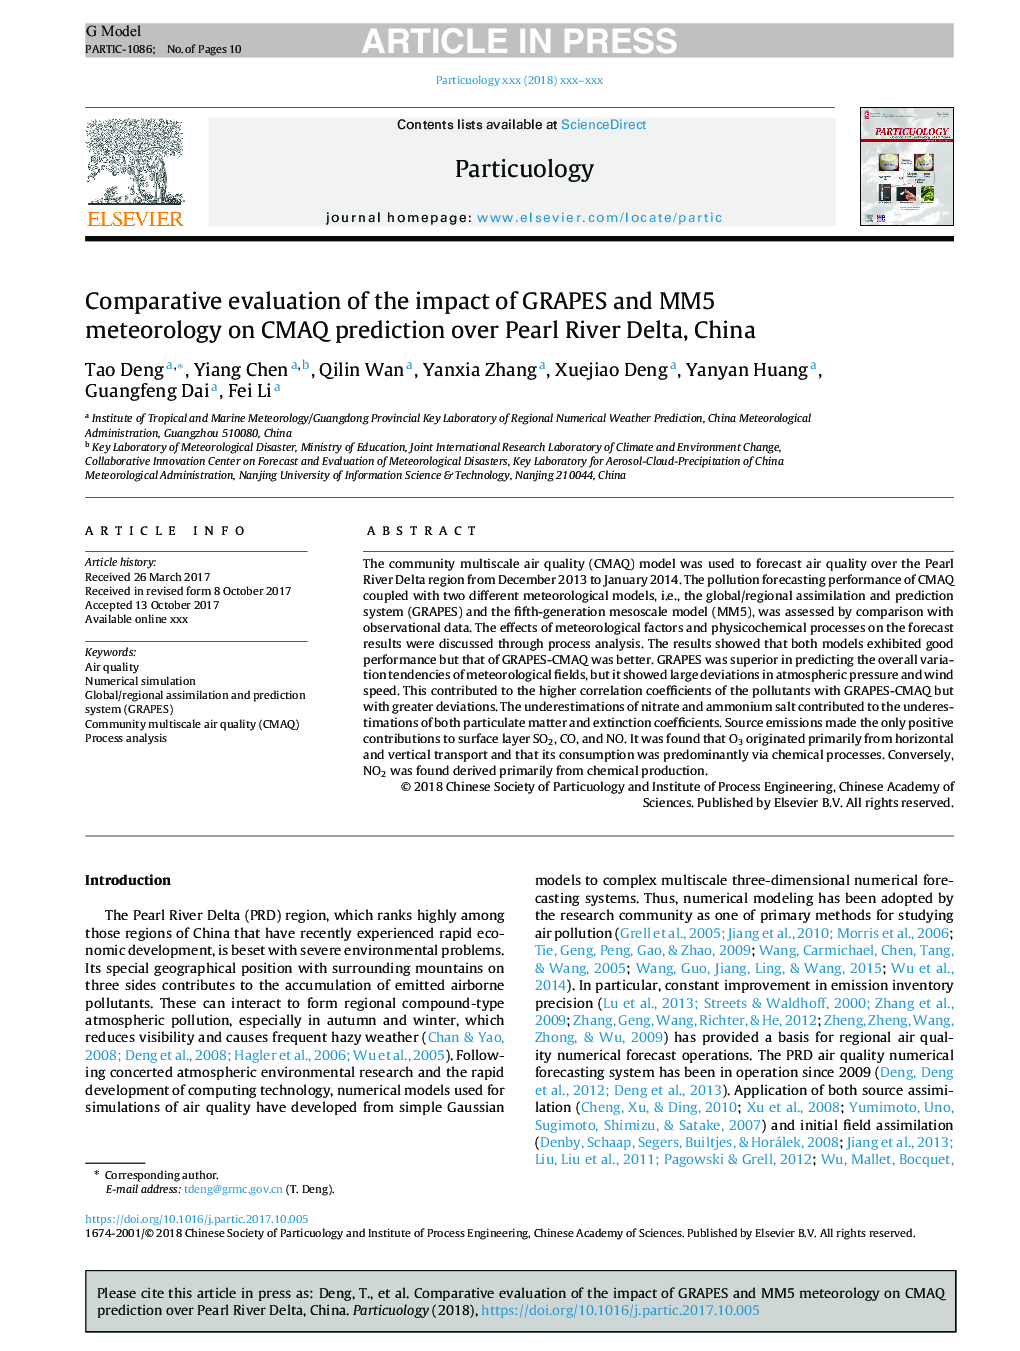 Comparative evaluation of the impact of GRAPES and MM5 meteorology on CMAQ prediction over Pearl River Delta, China